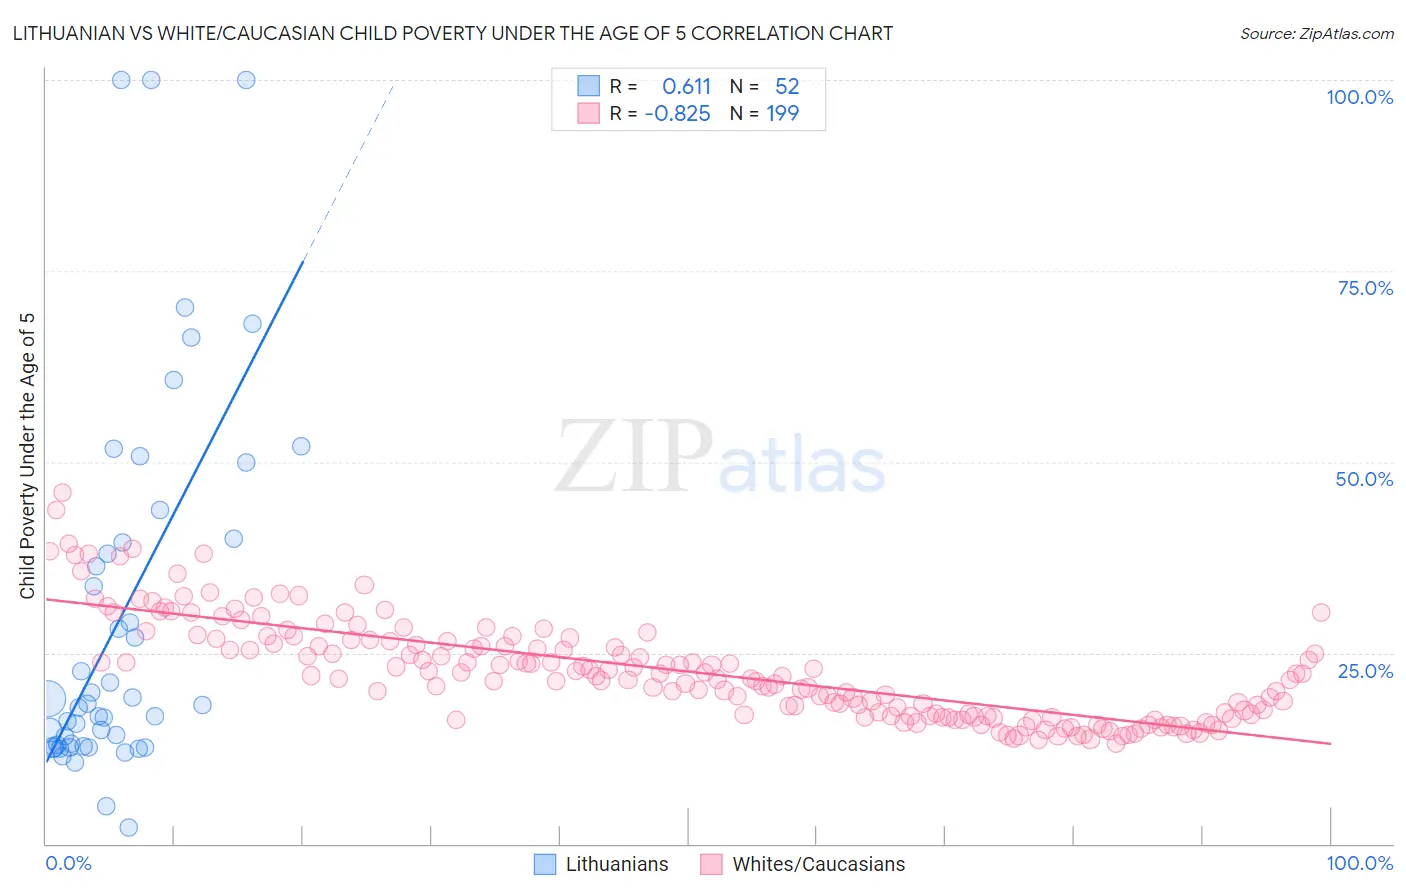 Lithuanian vs White/Caucasian Child Poverty Under the Age of 5